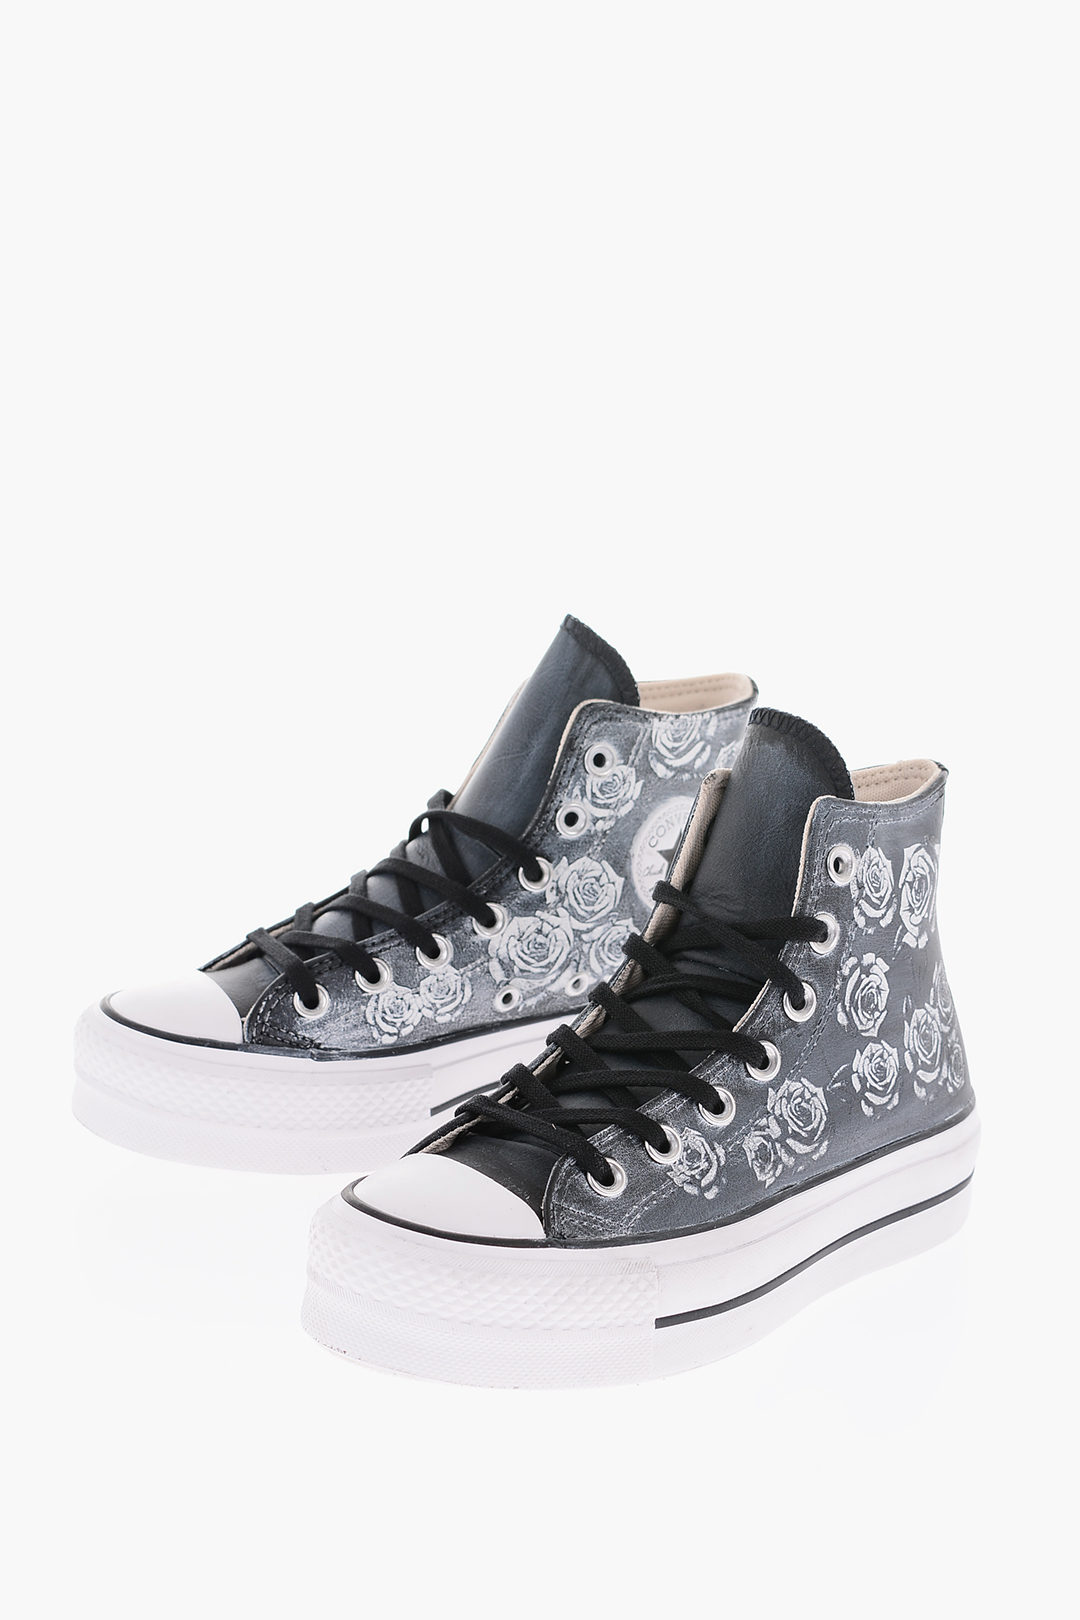 campo Parque jurásico habilitar Converse ALL STAR CHUCK TAYLOR 4cm Floral Patterned Leather High Top  Sneakers with Platform women - Glamood Outlet